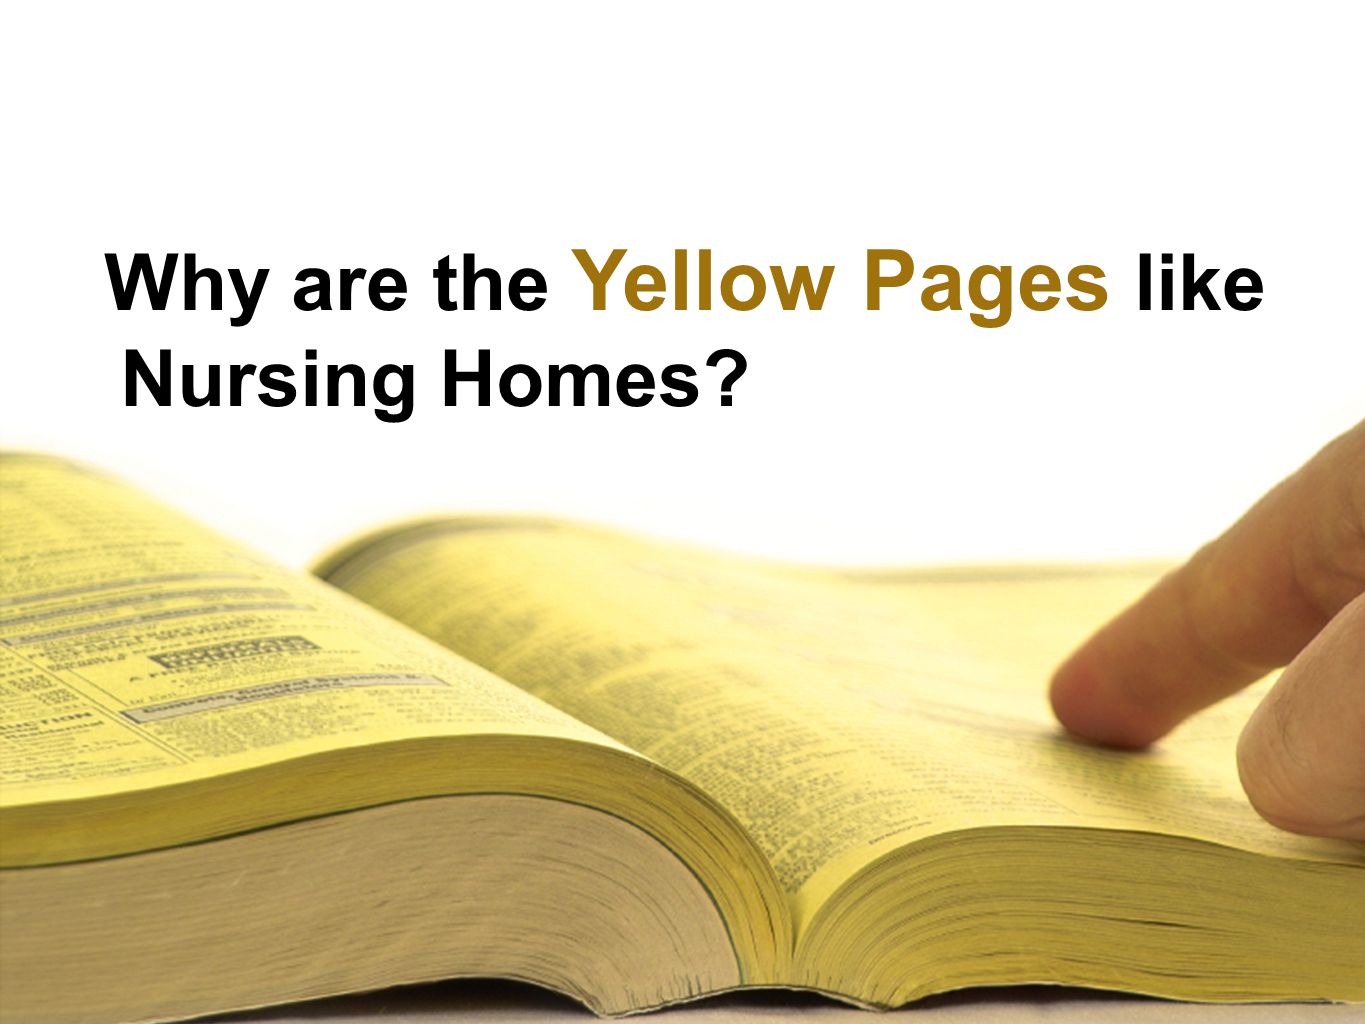 Why are the Yellow Pages like Nursing Homes